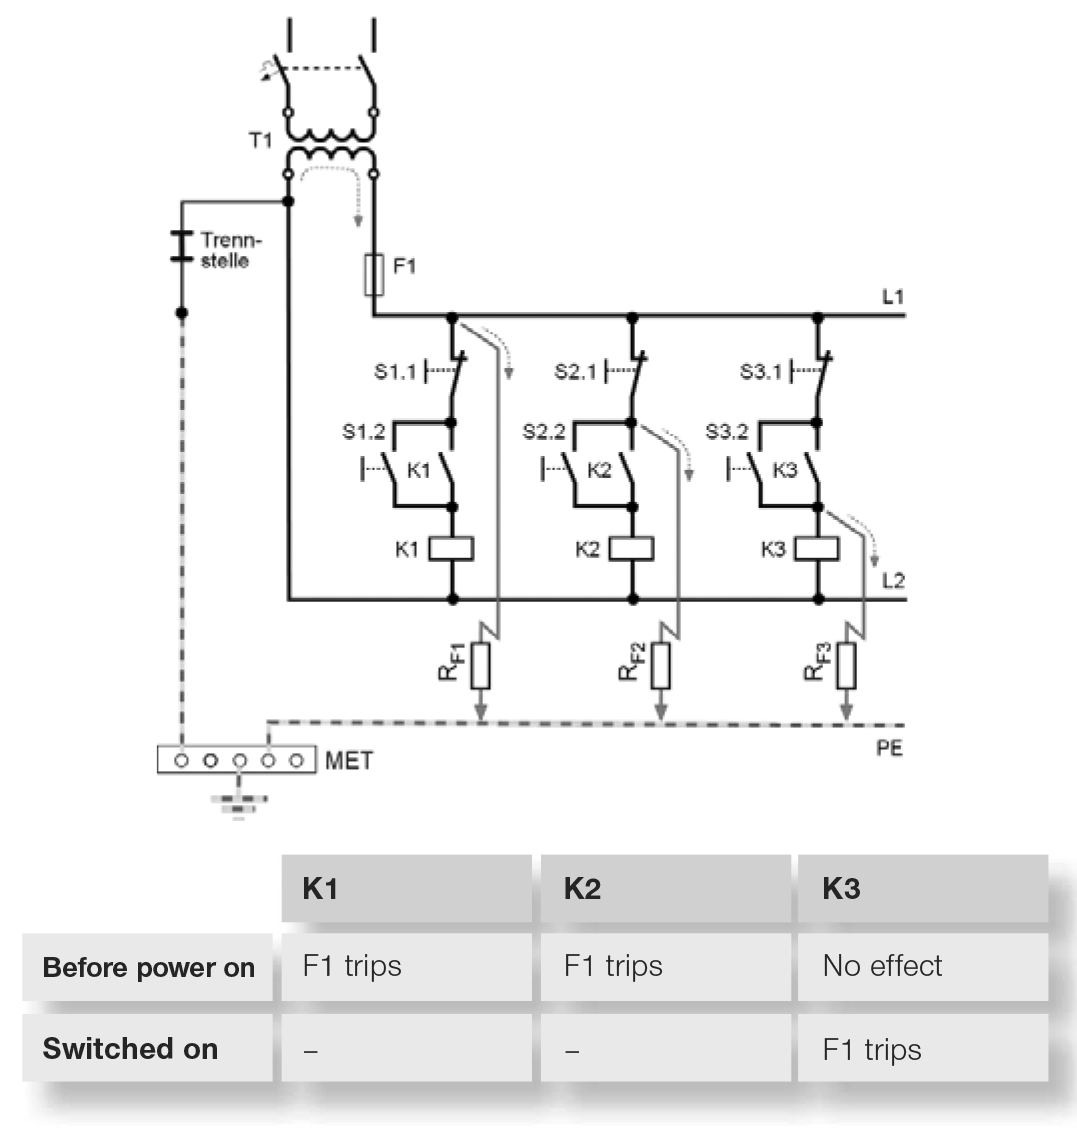 First fault in an earthed control circuit